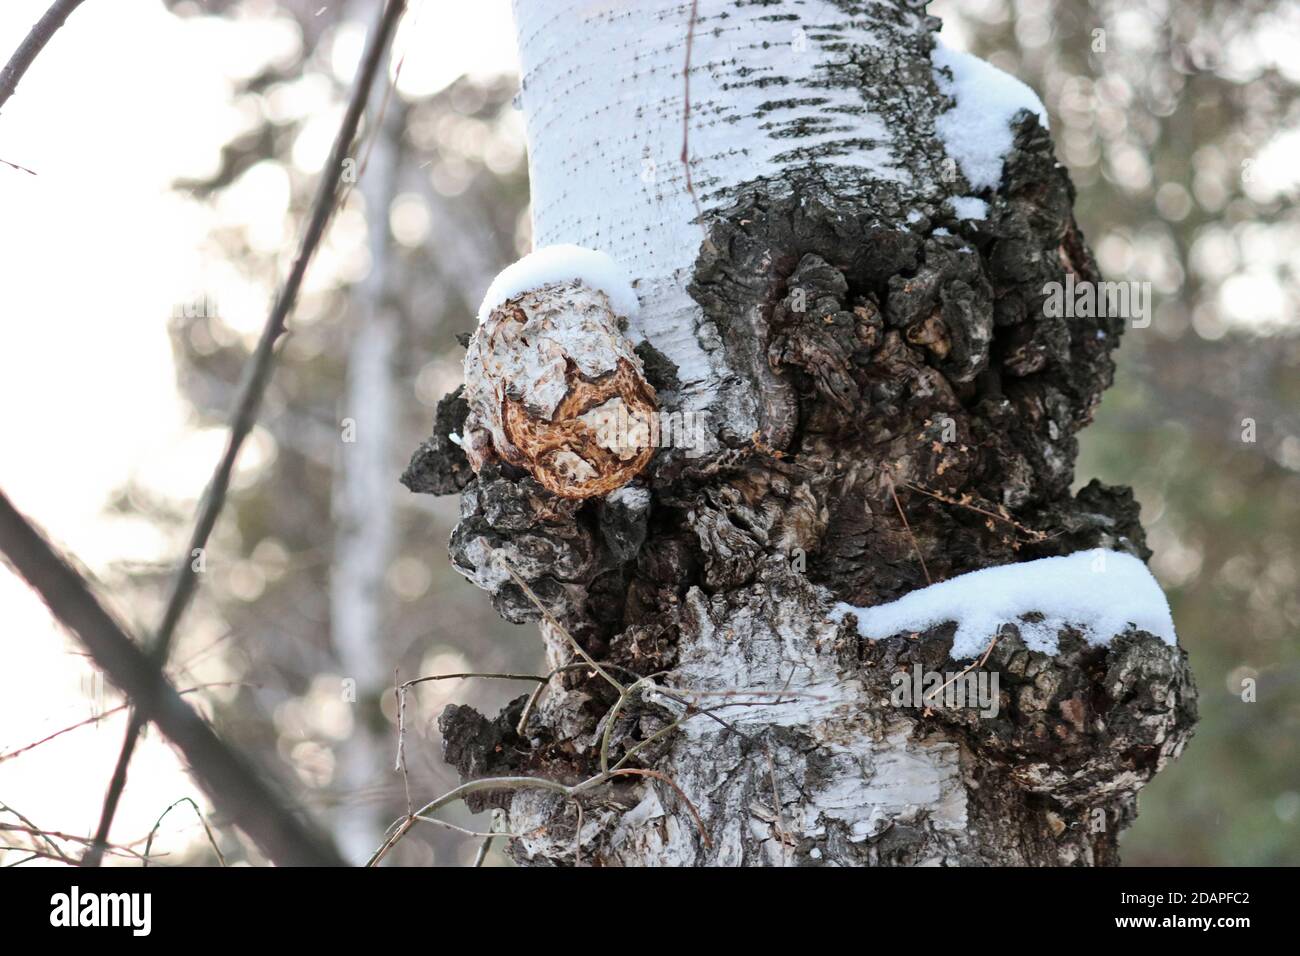 Chaga (Inonotus obliquus) is a fungus from the Hymenochaetaceae family. Potential medicine for coronavirus and cancer. It parasitizes birch trees. Stock Photo